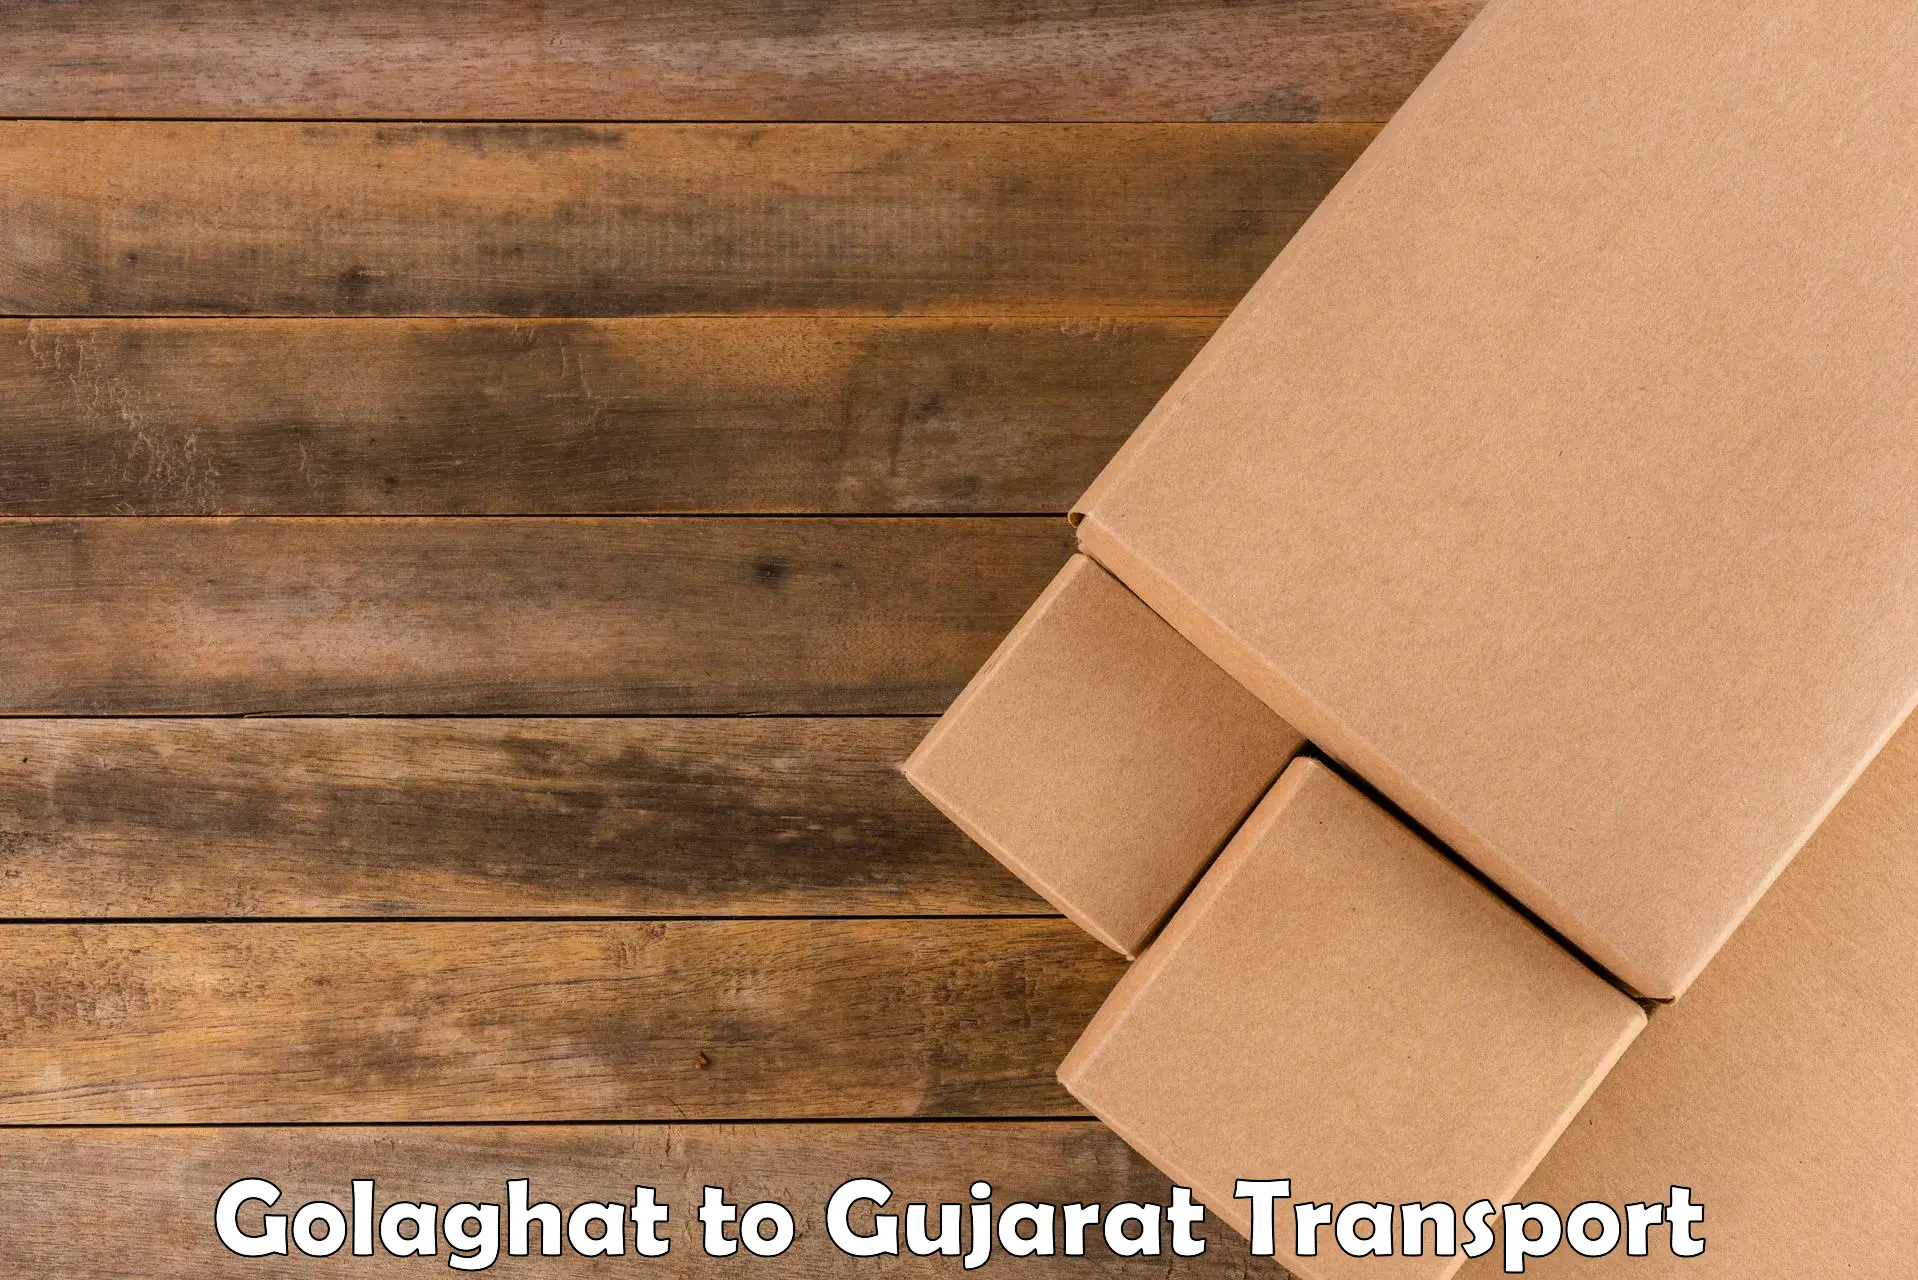 Shipping partner Golaghat to Mehsana